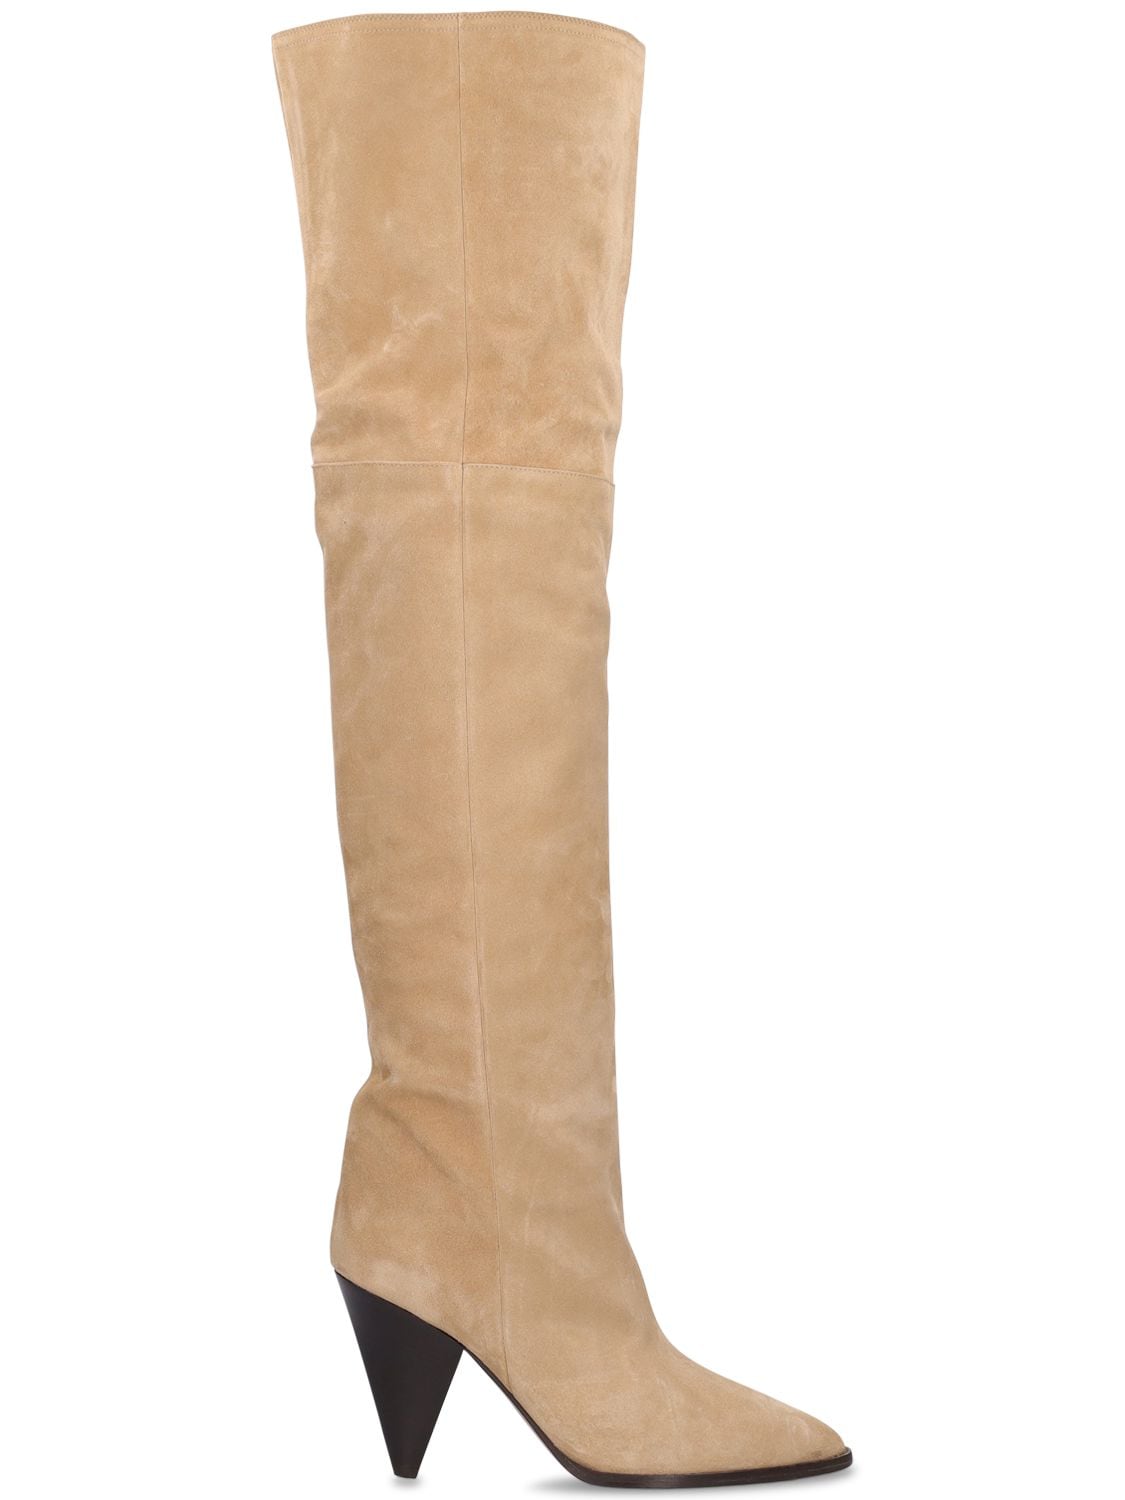 ISABEL MARANT 90mm Riria Suede Over-the-knee Boots